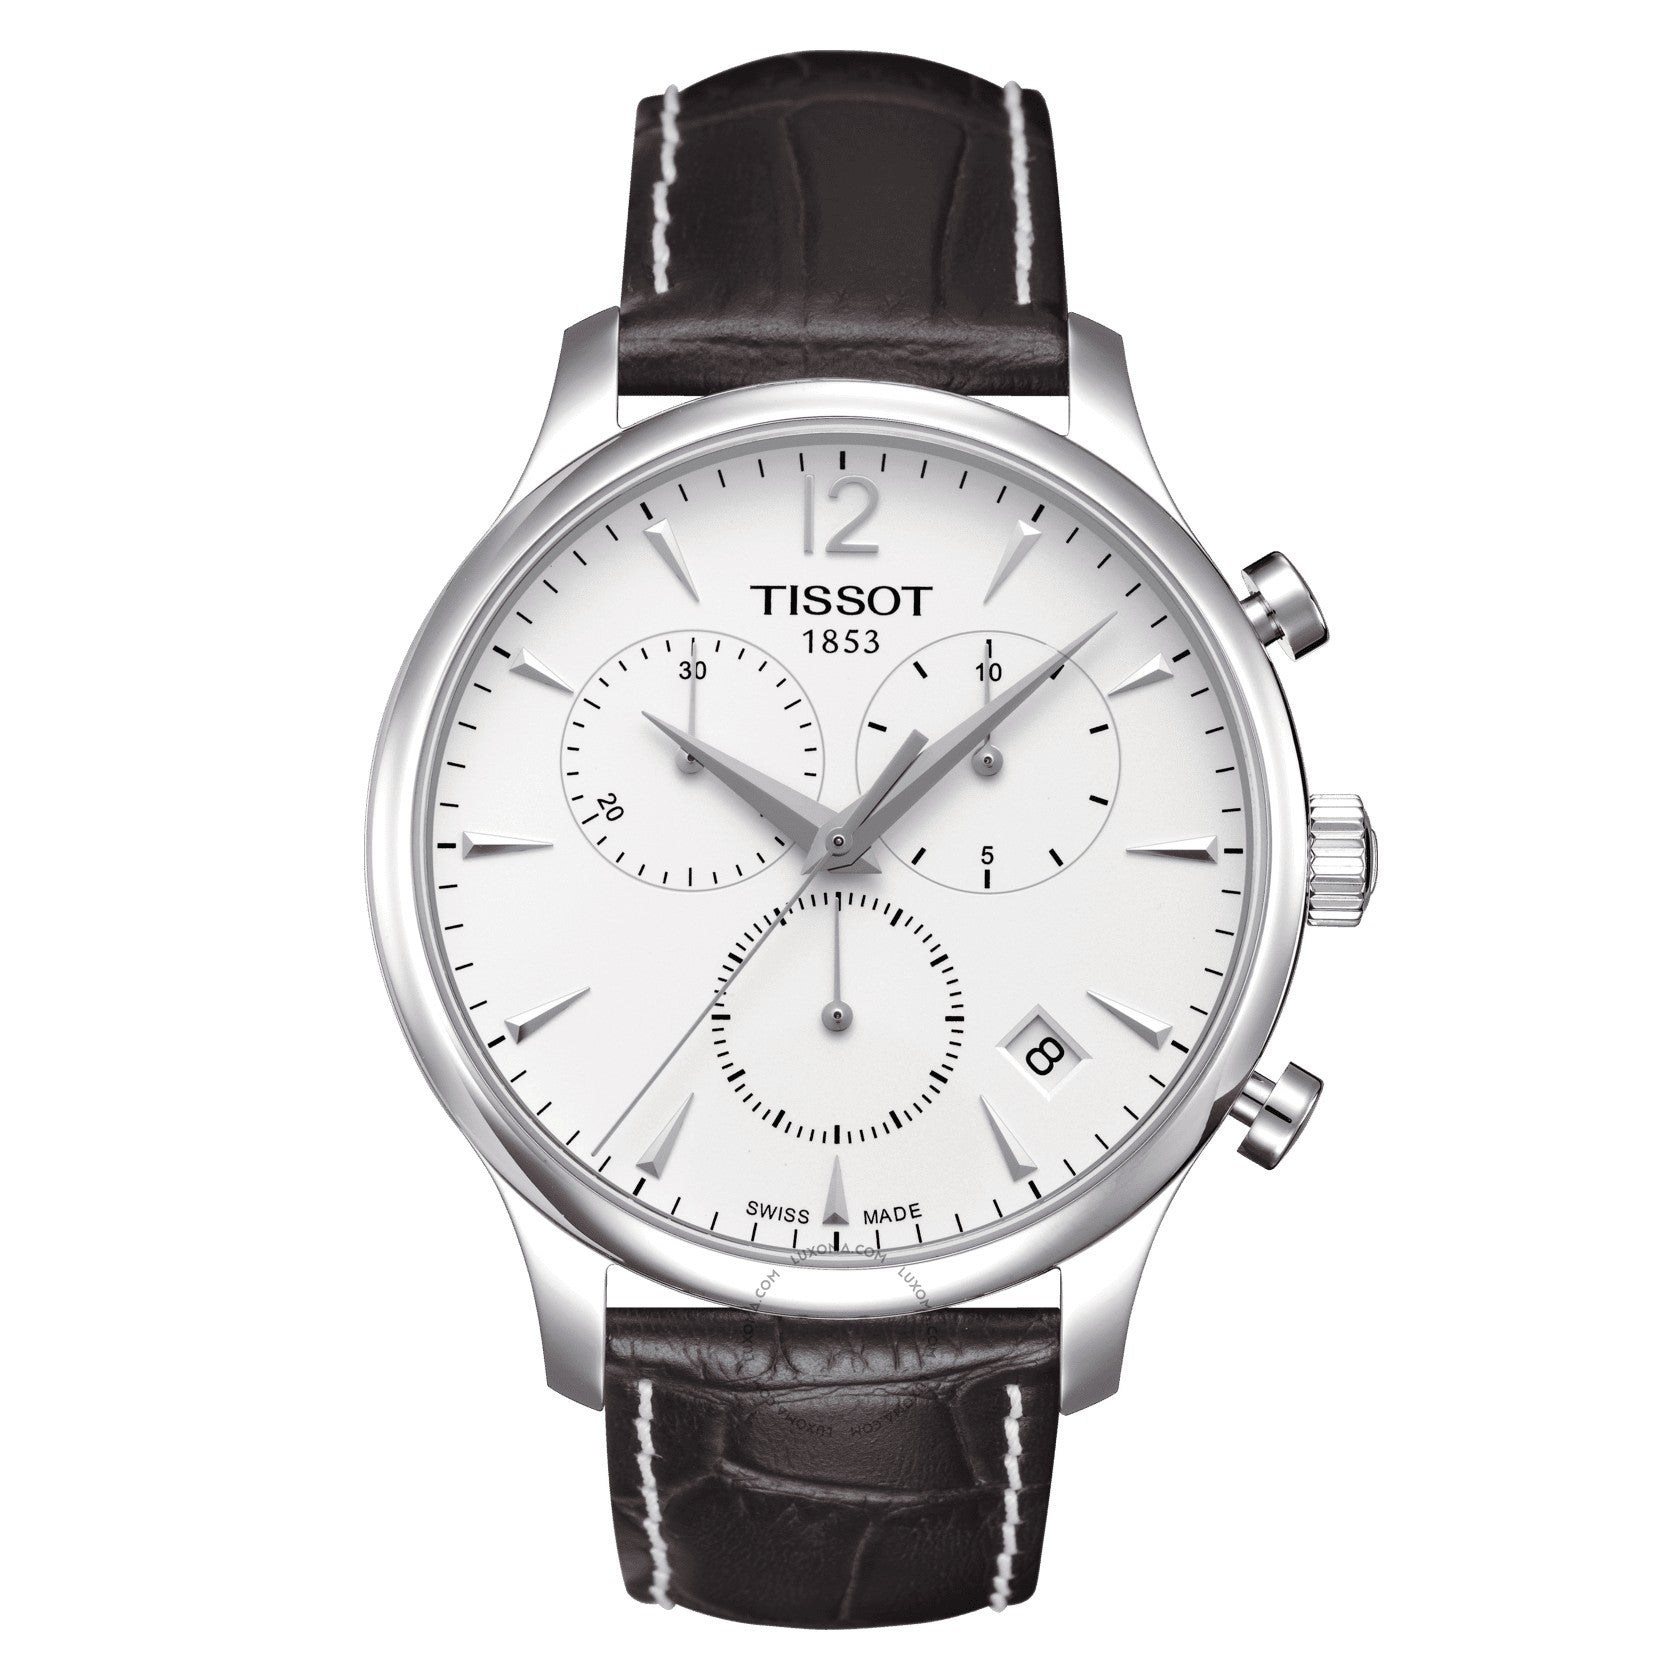 Tissot Tradition Chronograph Silver Dial Men's Watch T063.617.16.037.00